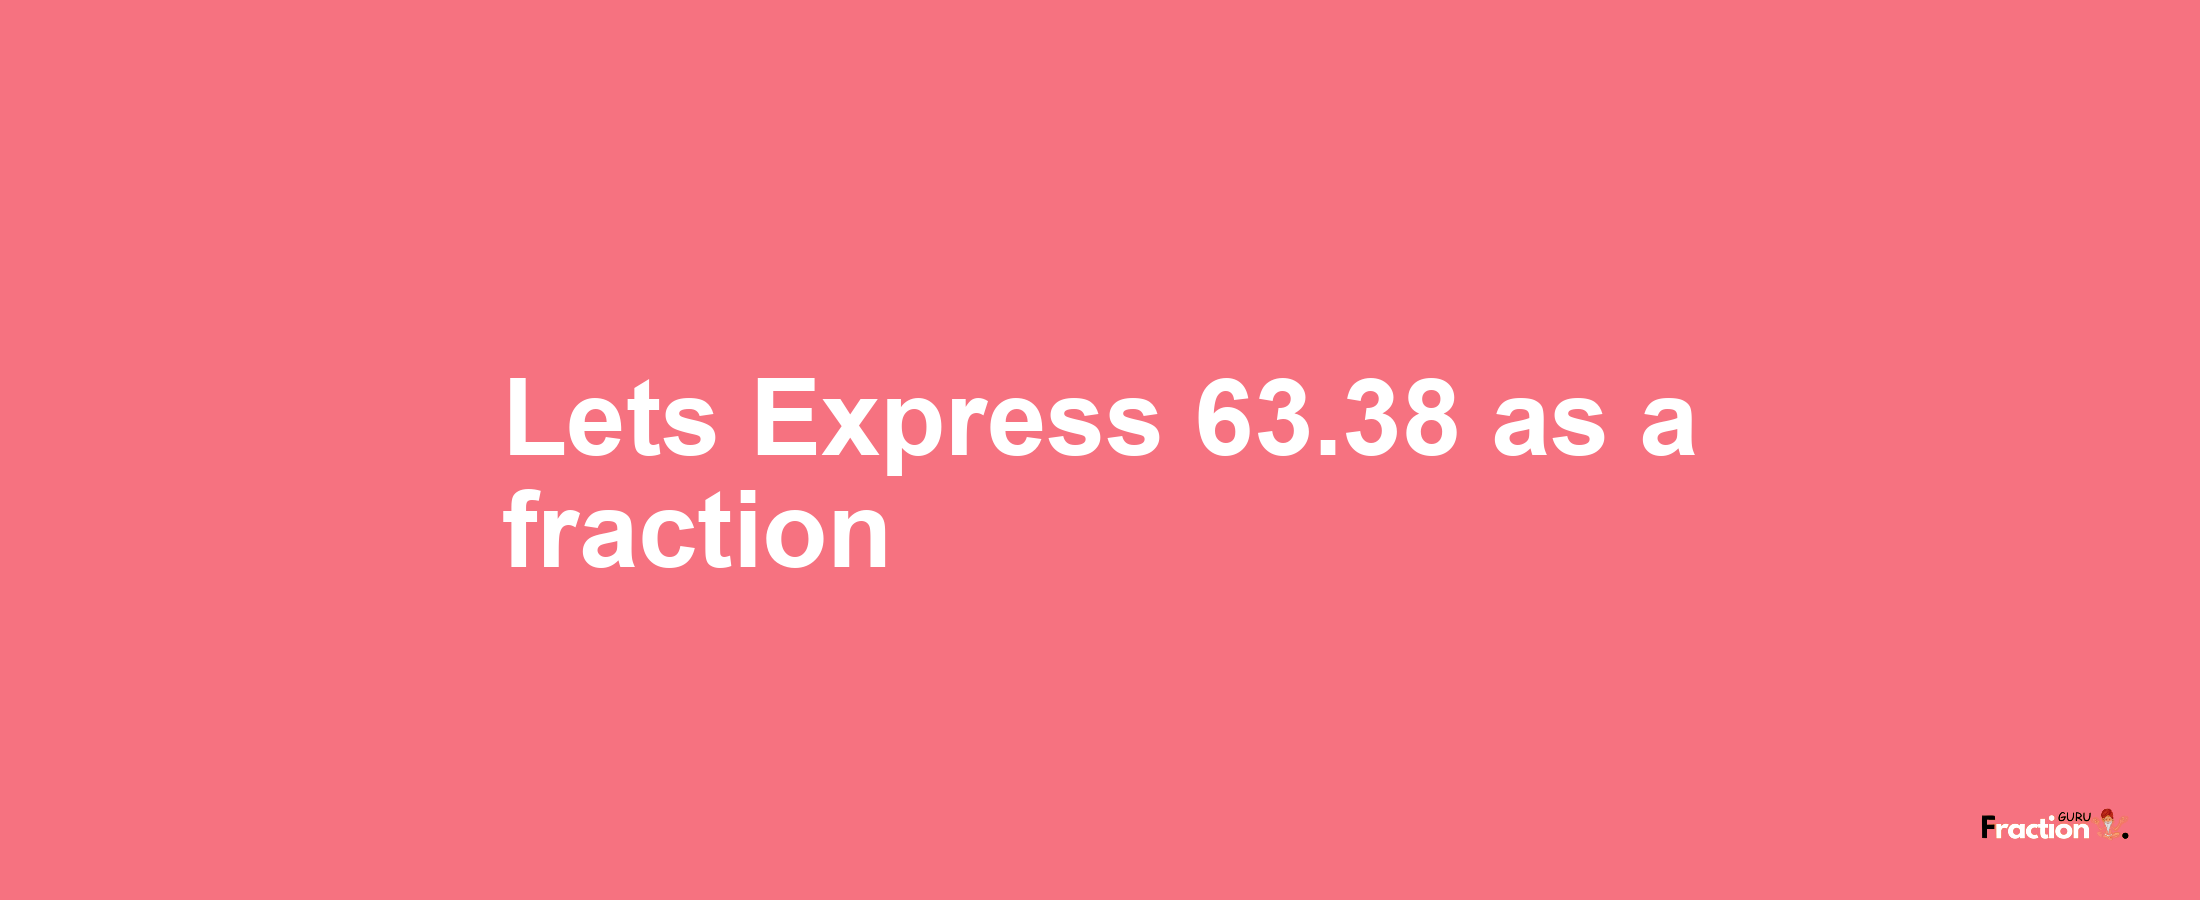 Lets Express 63.38 as afraction